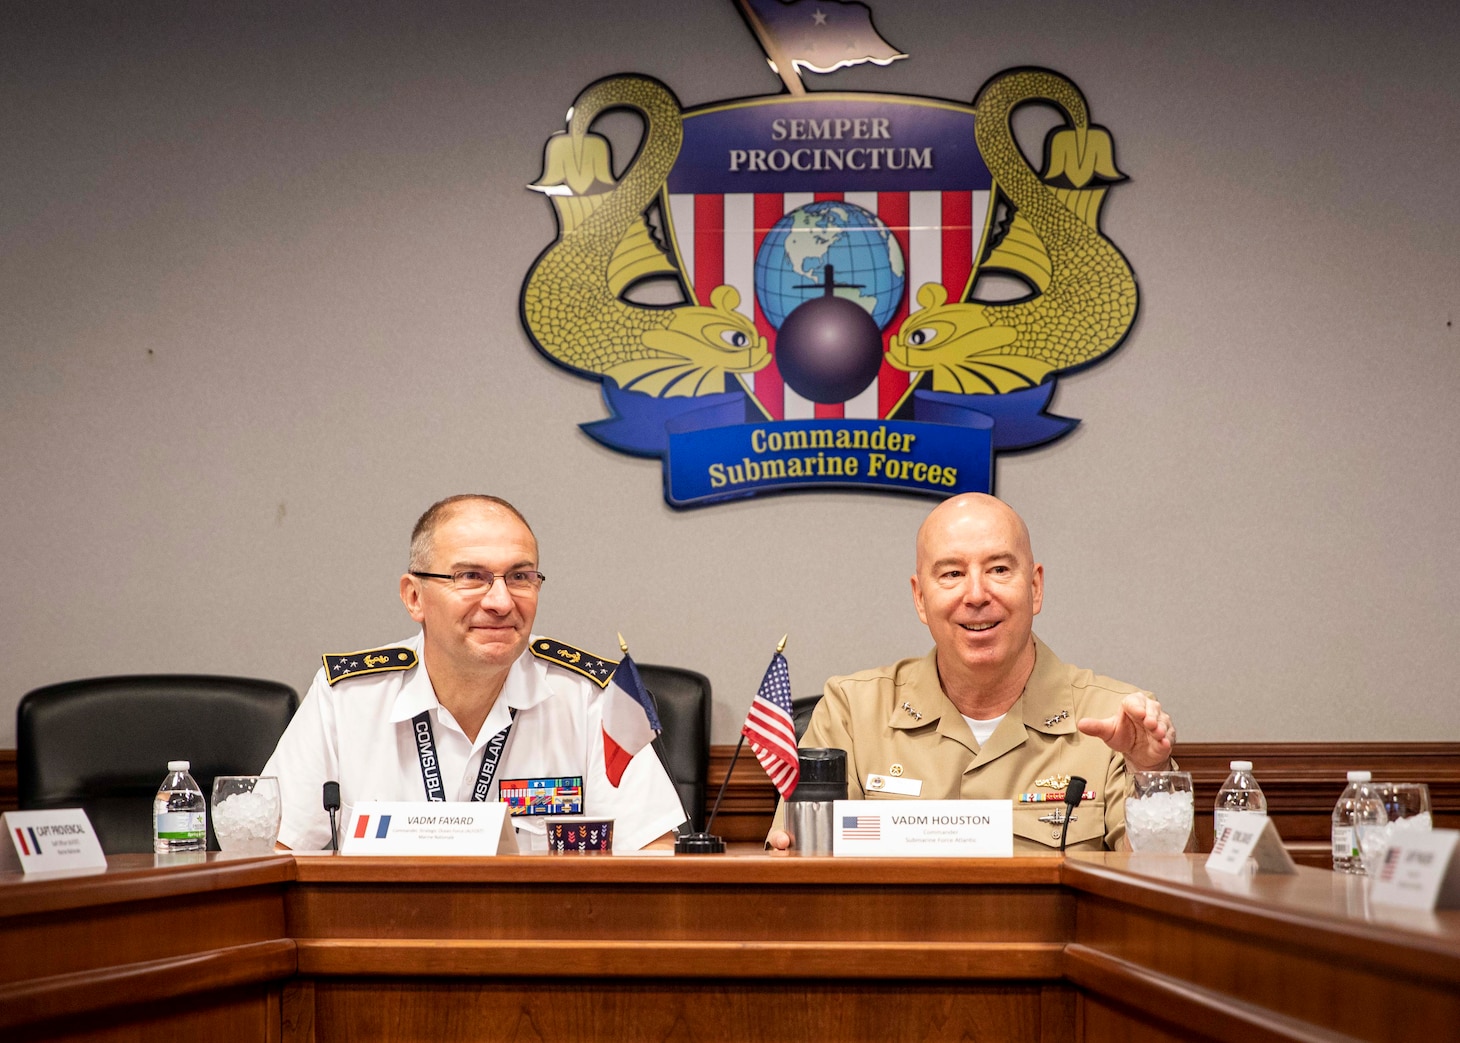 Vice Adm. William Houston, right, commander, U.S. Submarine Forces, and French Vice Adm. Jacques Fayard, left, commander, Strategic and Oceanic Submarine Force, speak during Fayard’s visit to Naval Support Activity Hampton Roads, Oct. 11, 2022.